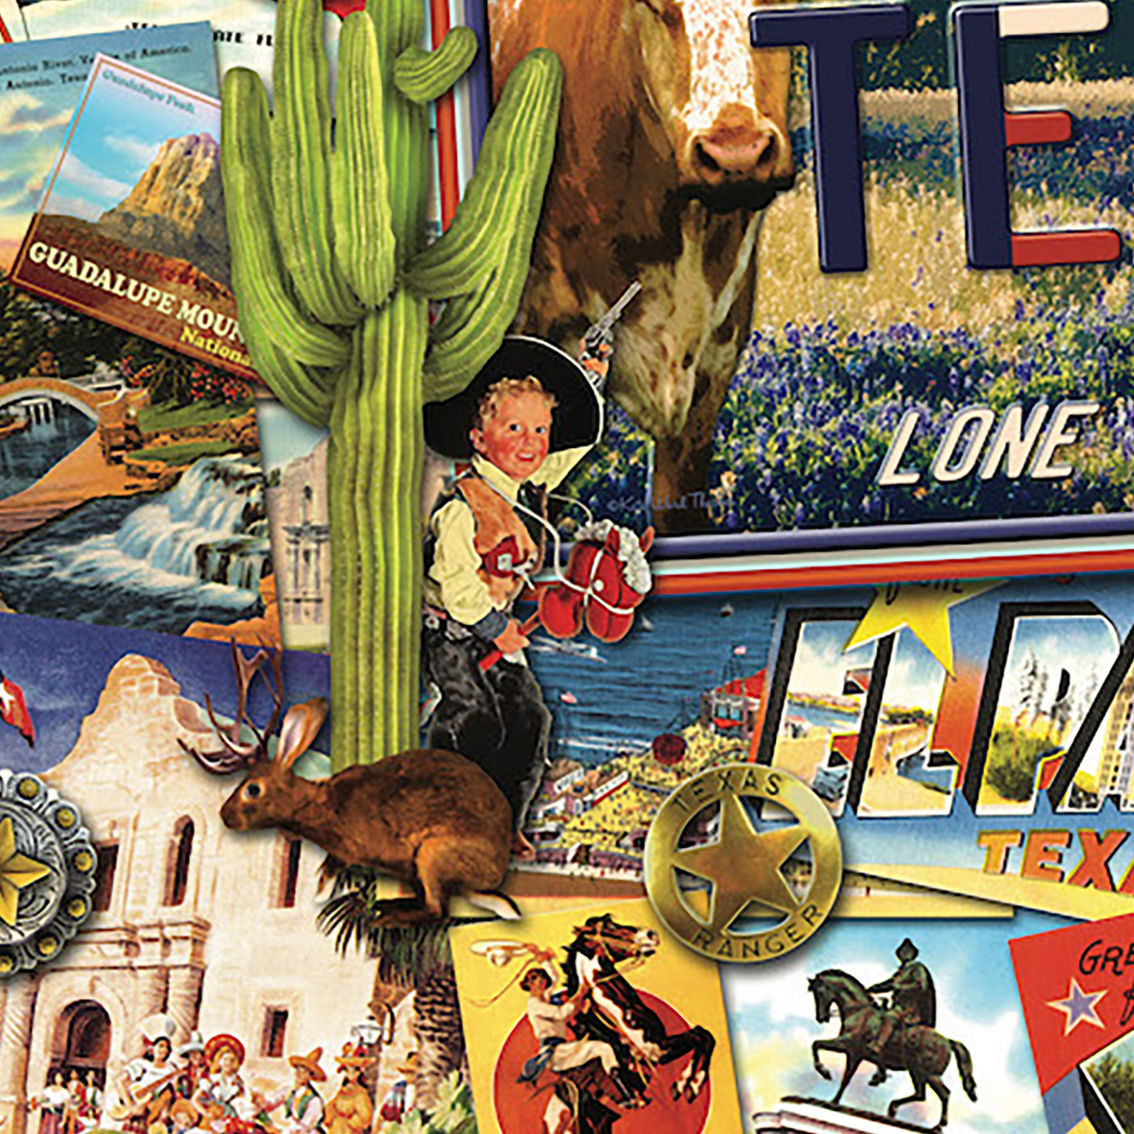 Hart Puzzles Lone Star State 1,000 pc. Puzzle - Image 5 of 6